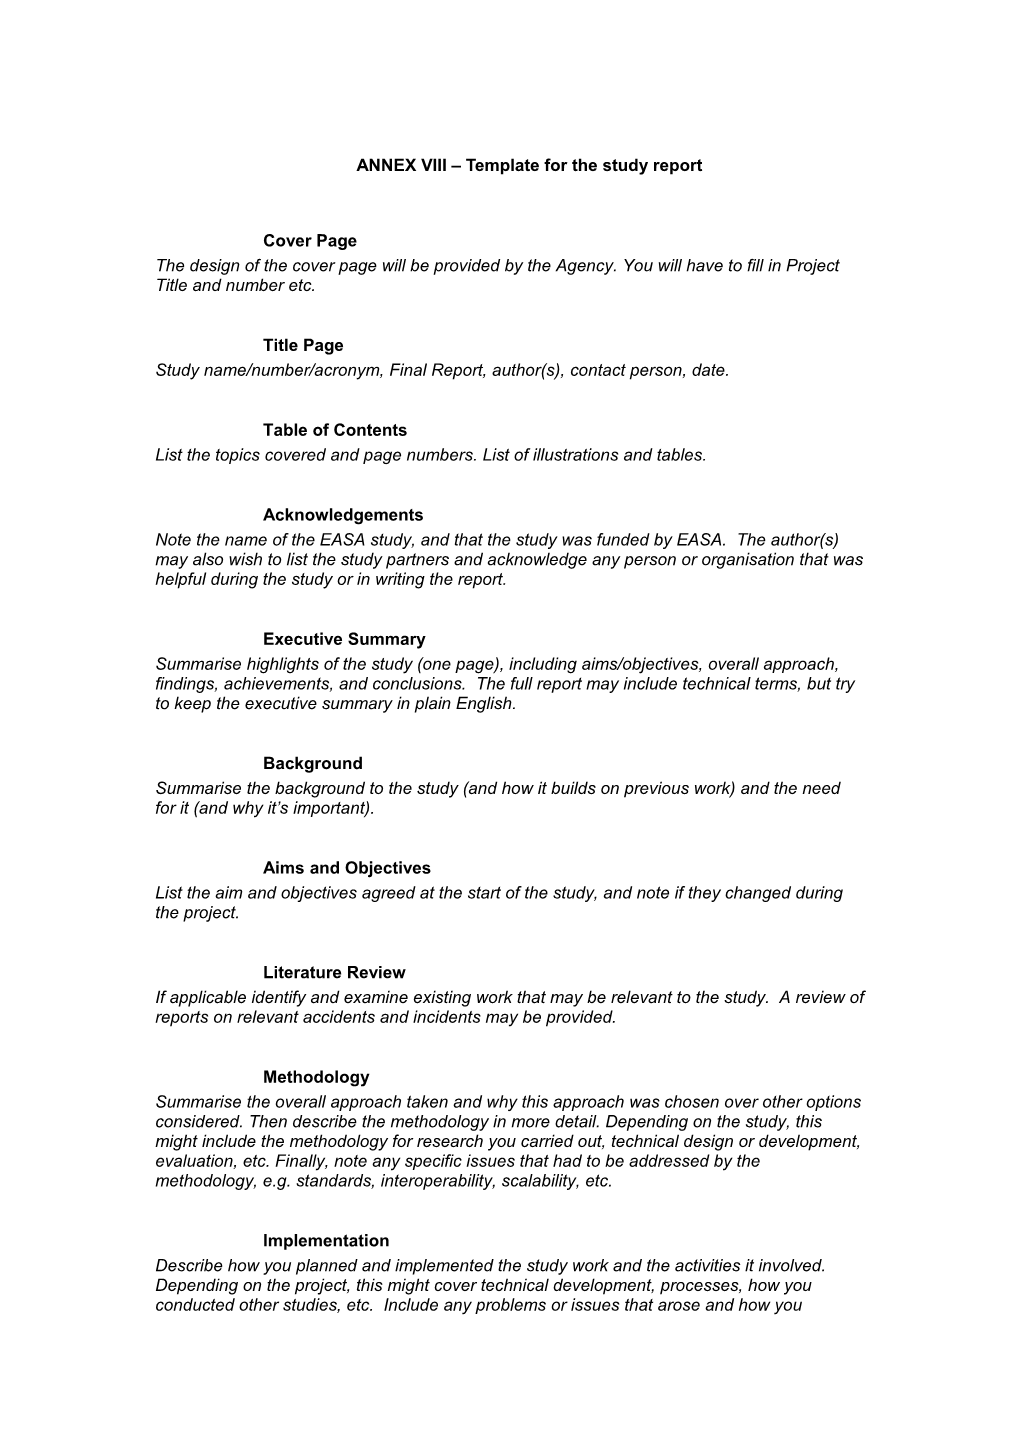 ANNEX VIII Template for the Study Report